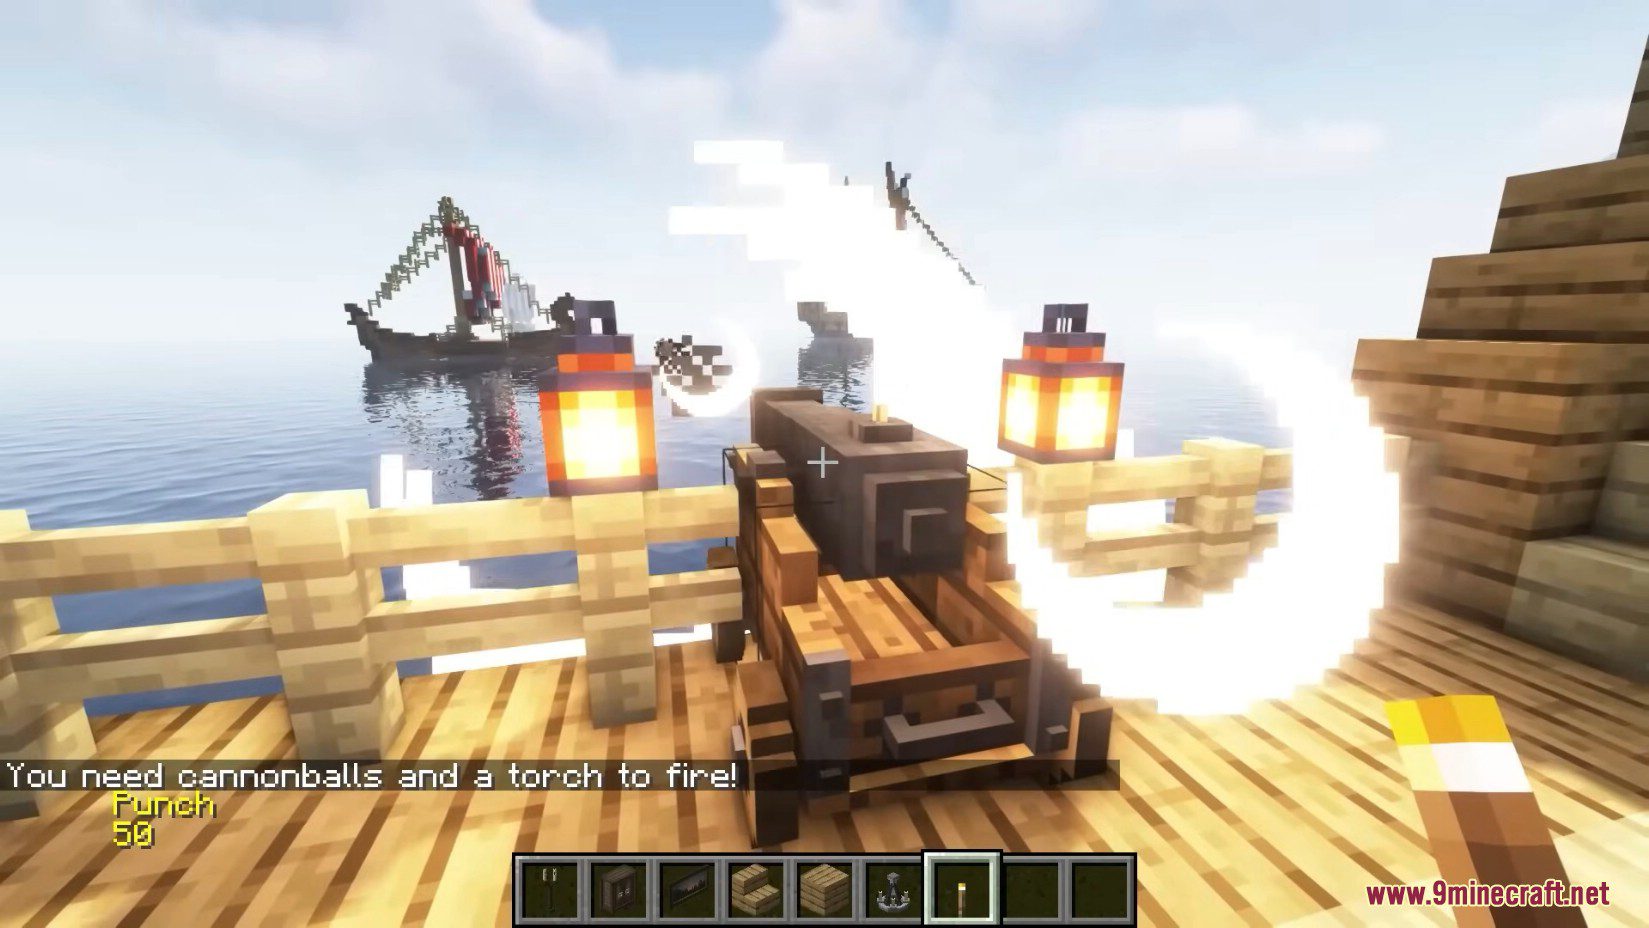 Pirate Cannons Mod (1.16.5) - Fulfill Your Pirate Dreams 11